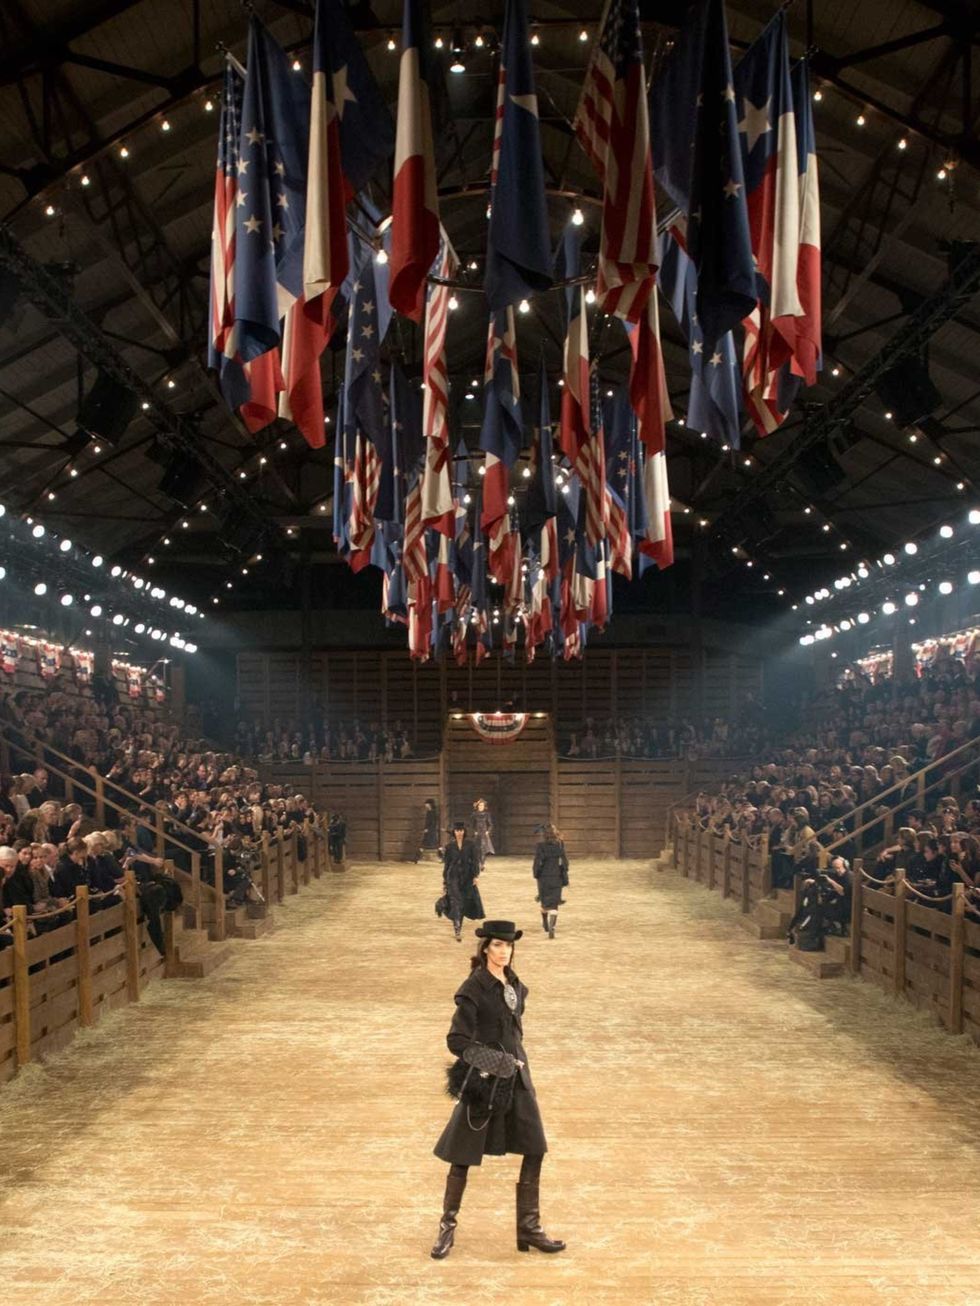 <p>Karl Lagerfeld and the Chanel team took their Metier d'Art show to Dallas, Texas last night. Fringing, feathers and cowboys on the catwalk? check. Celebrties sitting in vintage American cars? Check. A rodeo arena for a stage? Of course. Here's a look a